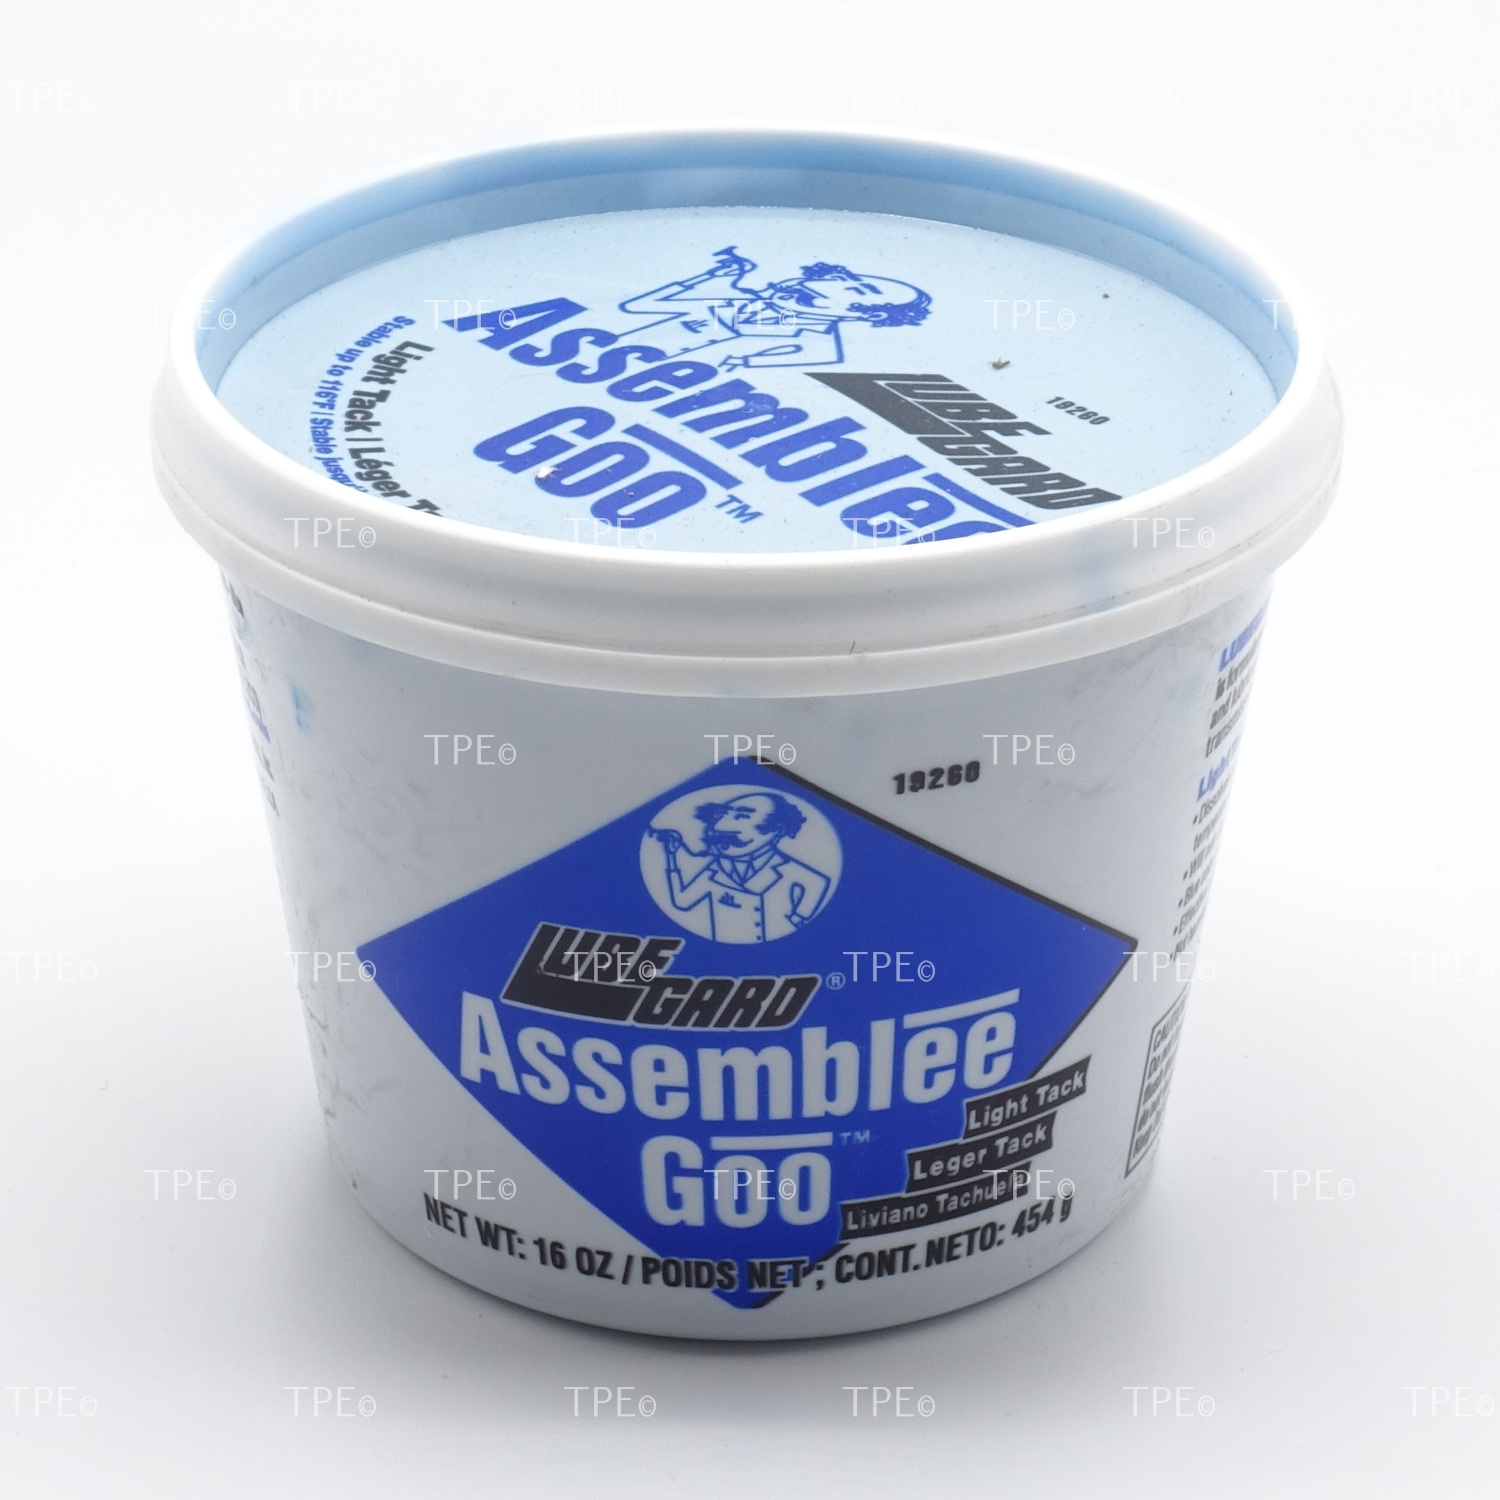 08.LU.19260 DESCRIPTION
ASSEMBLEE GOO is formulated for use as an assembly aid and lubricant for virtually any assembly application (including engines*). It provides helps facilitate the assembly process by holding components such as needle bearings and hydraulic seals in place. Assemblee Goo™ also provides the initial lubrication for the moving parts on the first start-up after service, preventing wear and scoring.

Our Assemblee Goos have been improved and are now formulated with our new LXE-XP™ additive to offer 'Extra Protection' against wear. This new technology now protects surfaces on a molecular level to offer unsurpassed anti-wear protection.

Simply apply to O-rings, seals, bearings, gaskets, sealing rings, bushings, thrust washers and more during the build process.

* Not for use on new camshaft lobe break-in when rebuilding overhead valve pushrod engines. Use a break-in product specific to that application.

FEATURES & BENEFITS
• Provides your choice of tack strength, firmer (GREEN) great for summer months and lighter tack (BLUE) great for winter months
• No water/soapy residue to contaminate new automatic transmission fluid
• Dyed green or blue to prevent misdiagnosing leaks
• Will not melt at shop temperatures
• Not harmful with prolonged skin contact
• Will not clog filters
• Dissolves quickly at operating temperatures
• Compatible with all transmission fluids
• Proprietary formula contains LXE-XP™ Technology